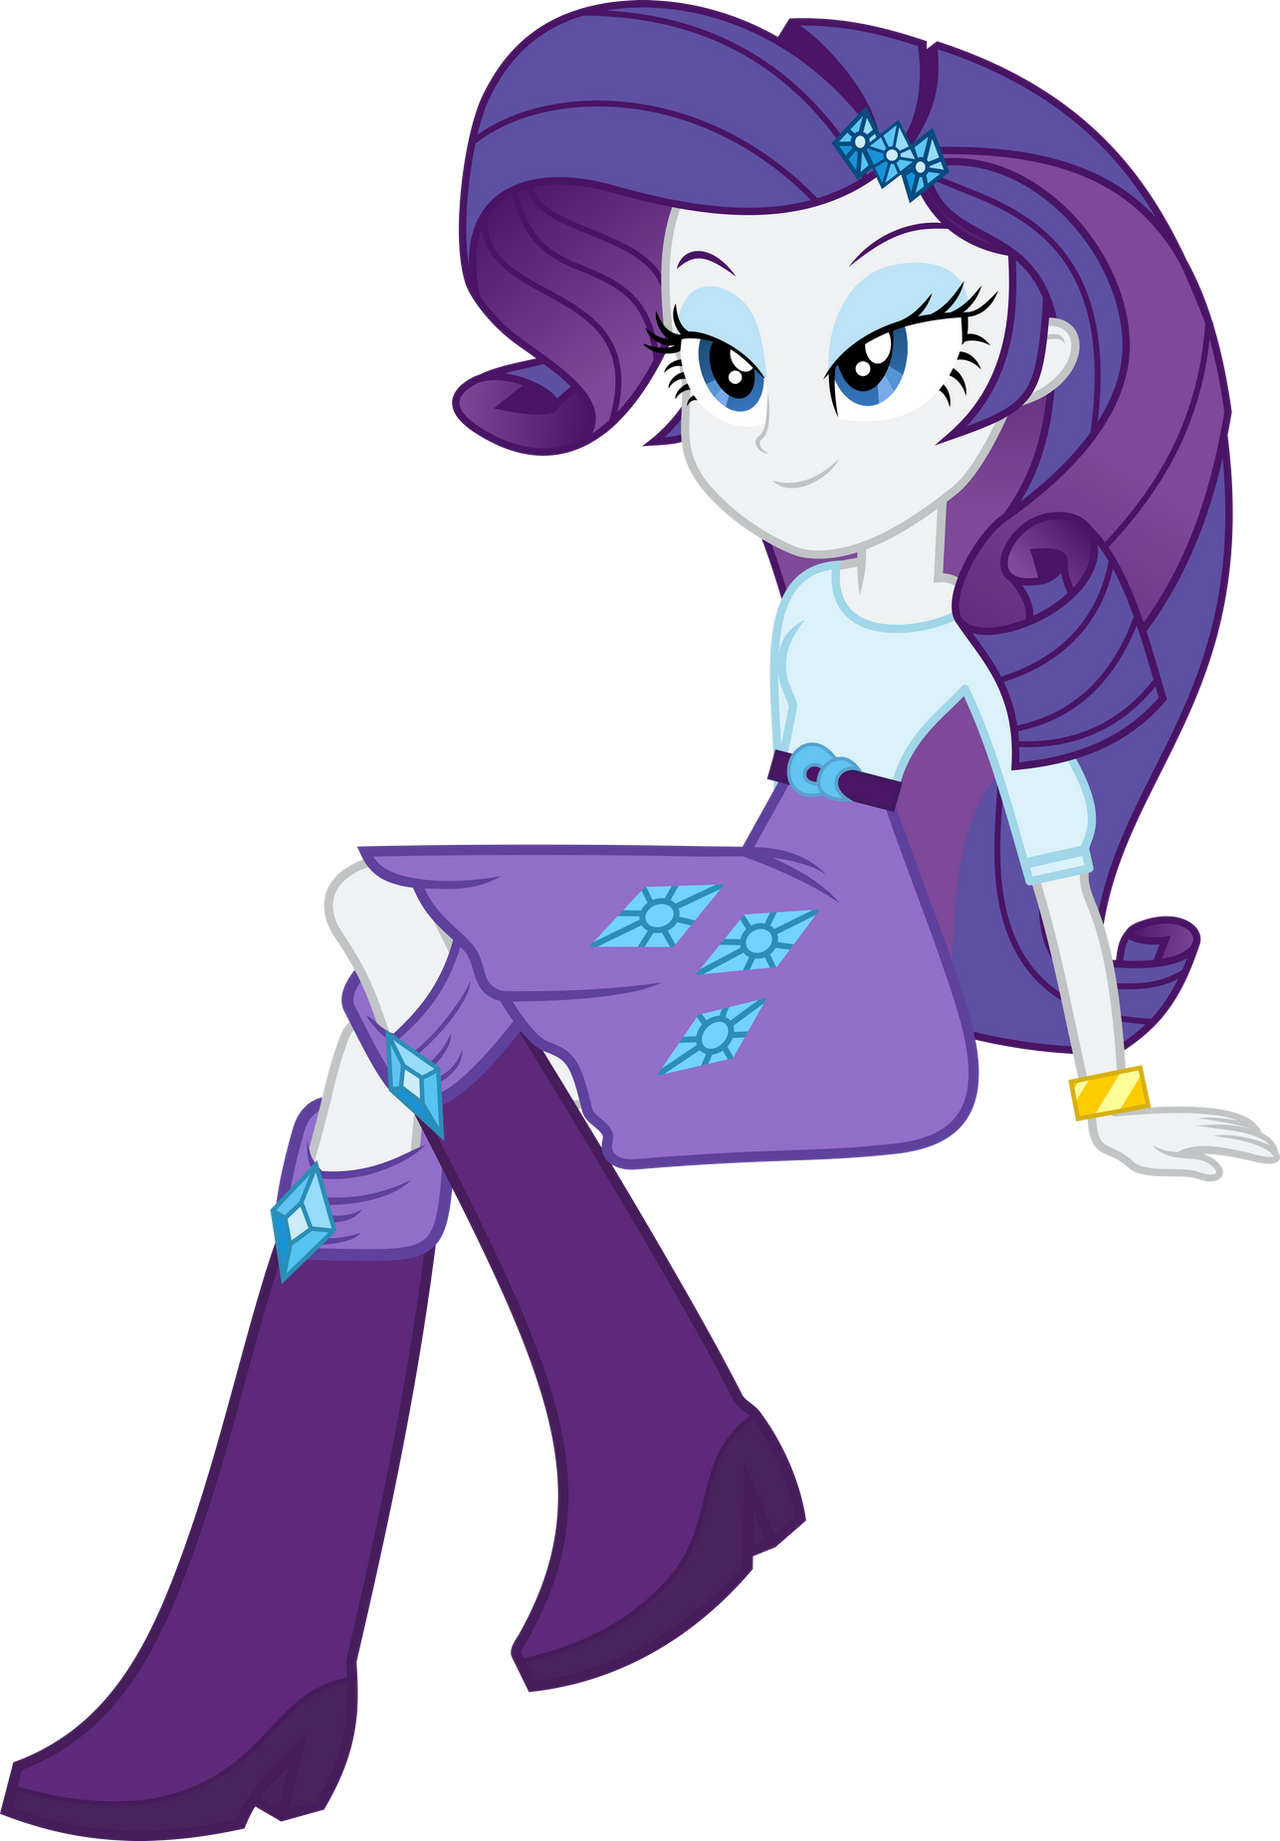 Rarity is watching at you by Macs44 on DeviantArt